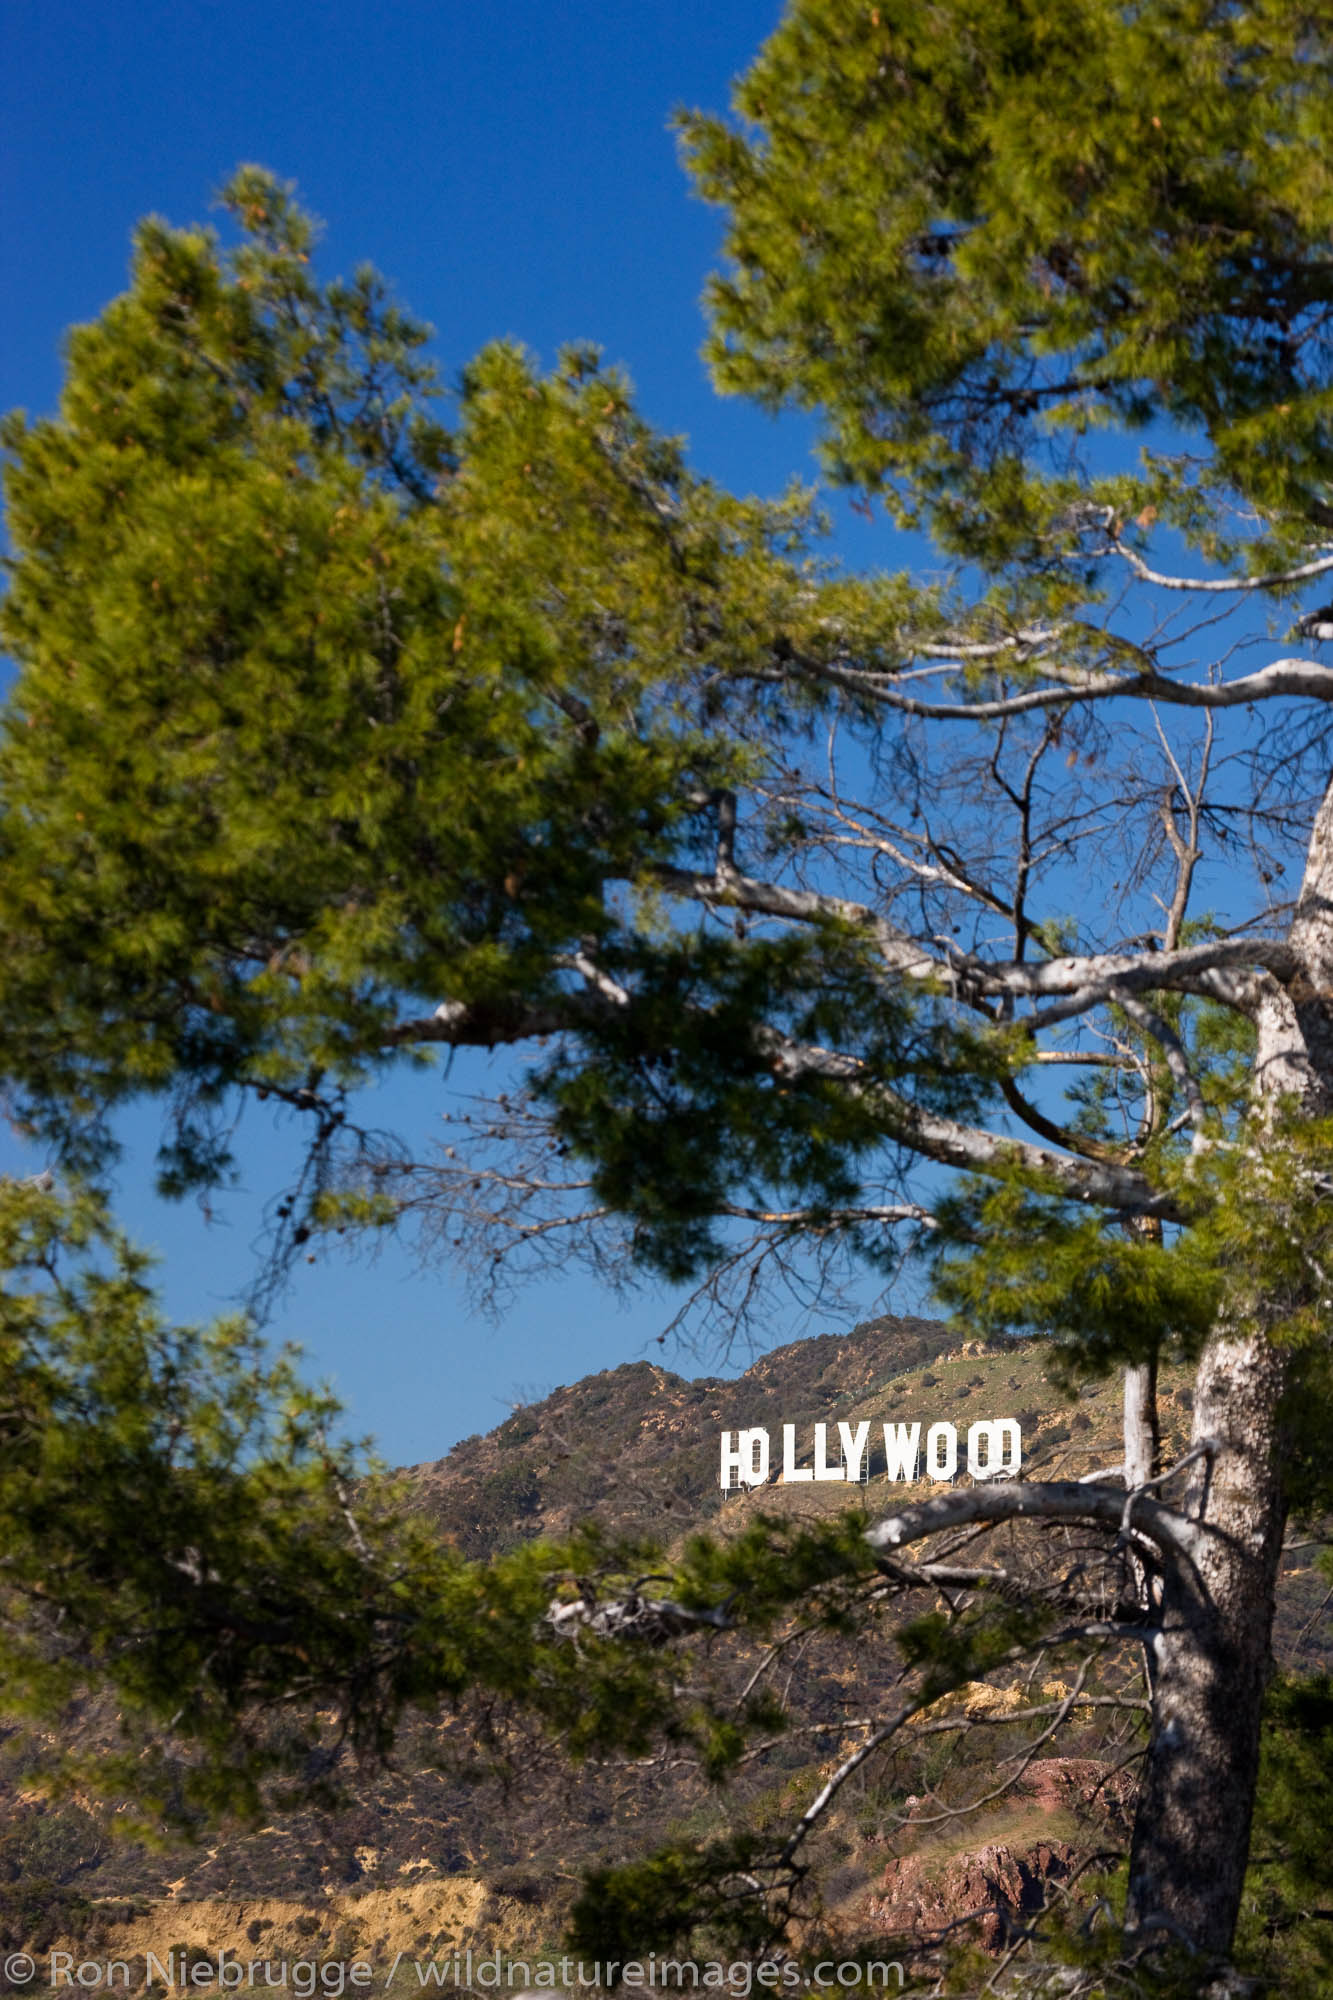 The Hollywood sign from Griffith Observatory, Los Angeles, California.